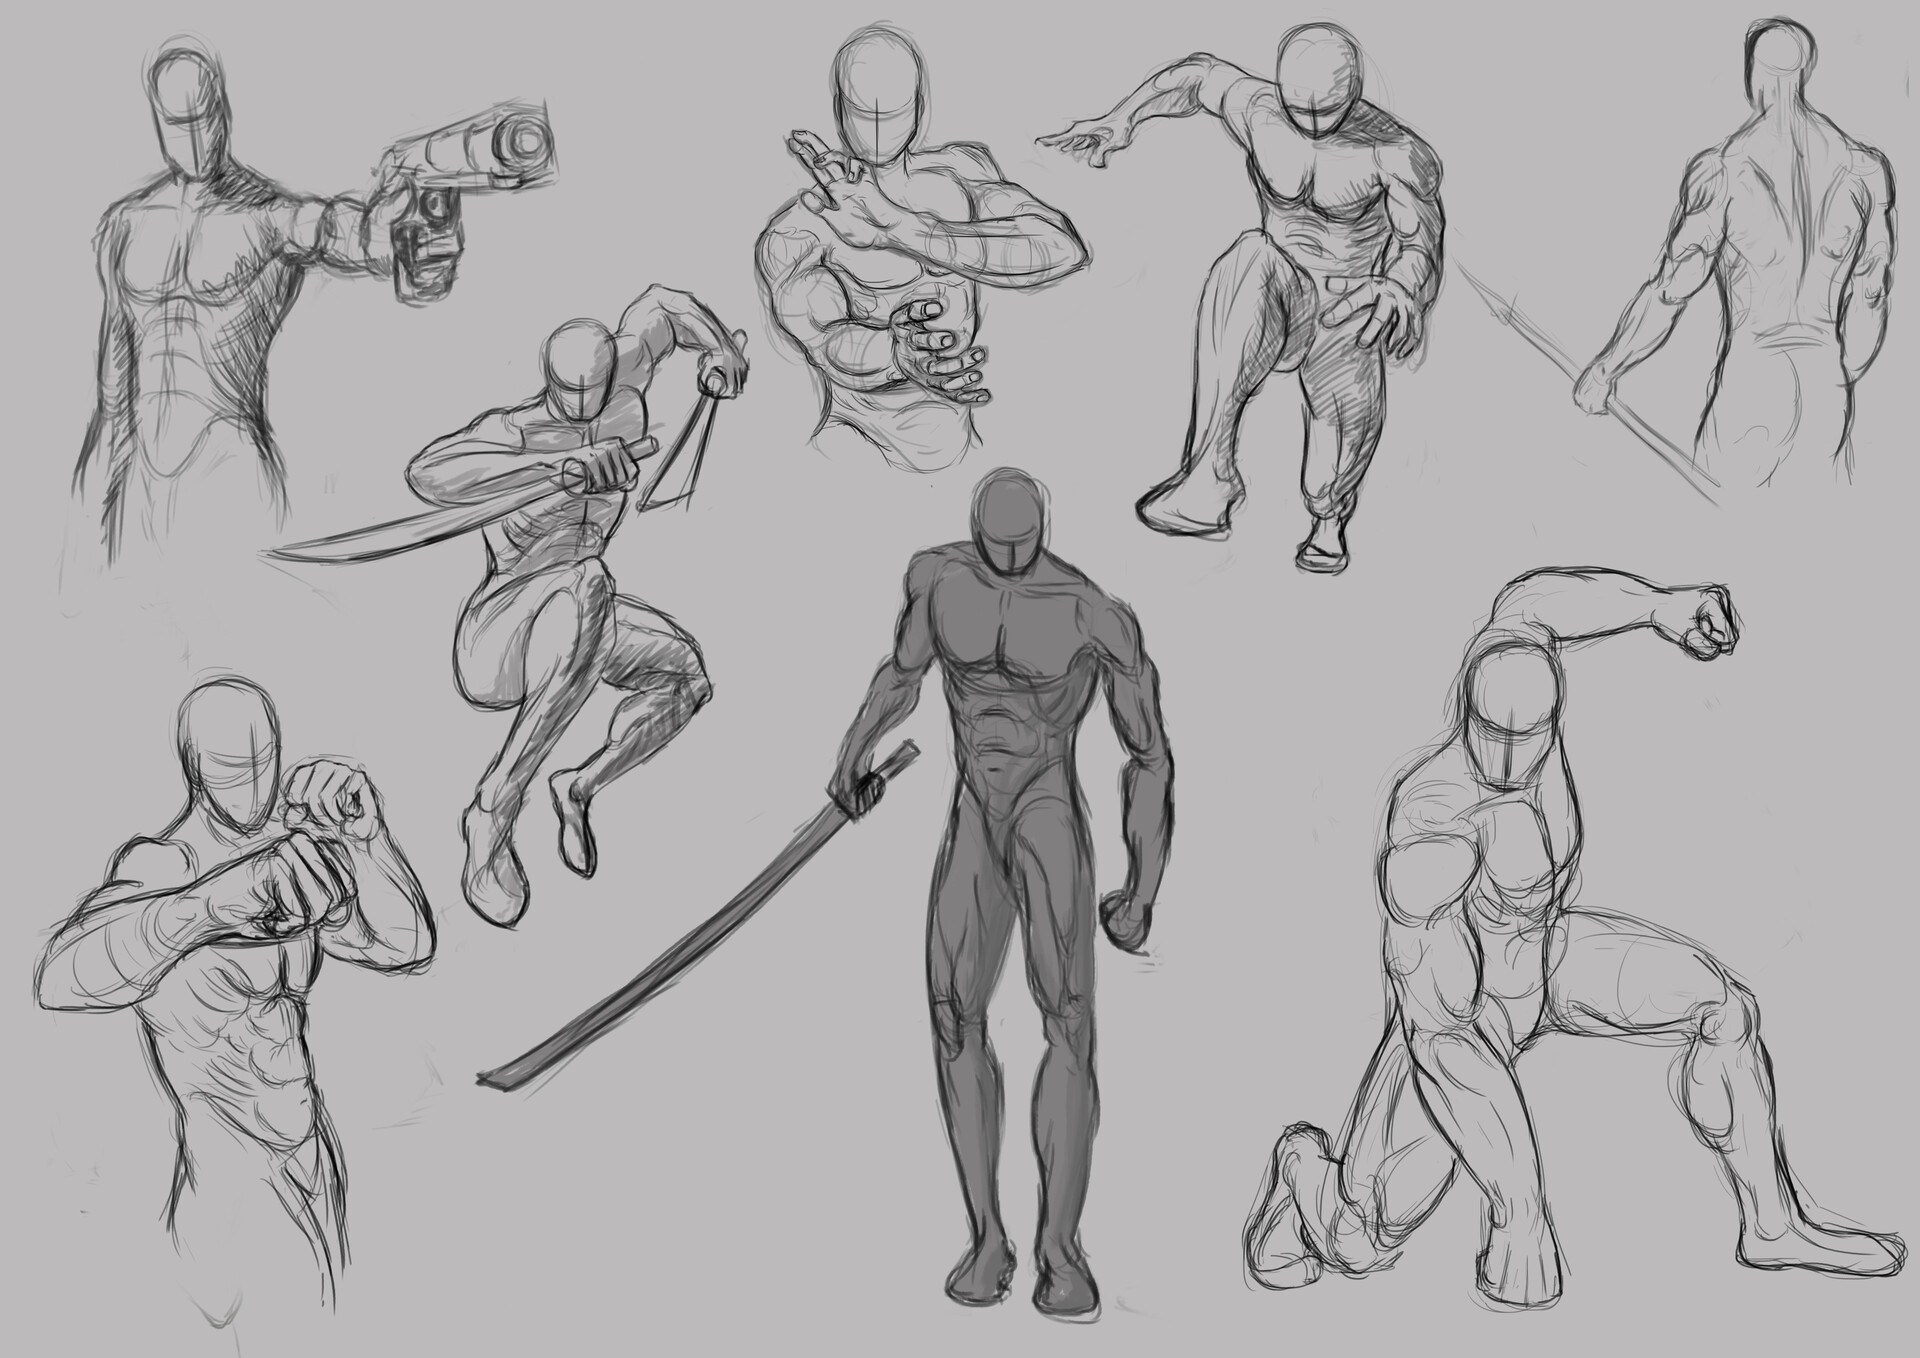 Few action poses.